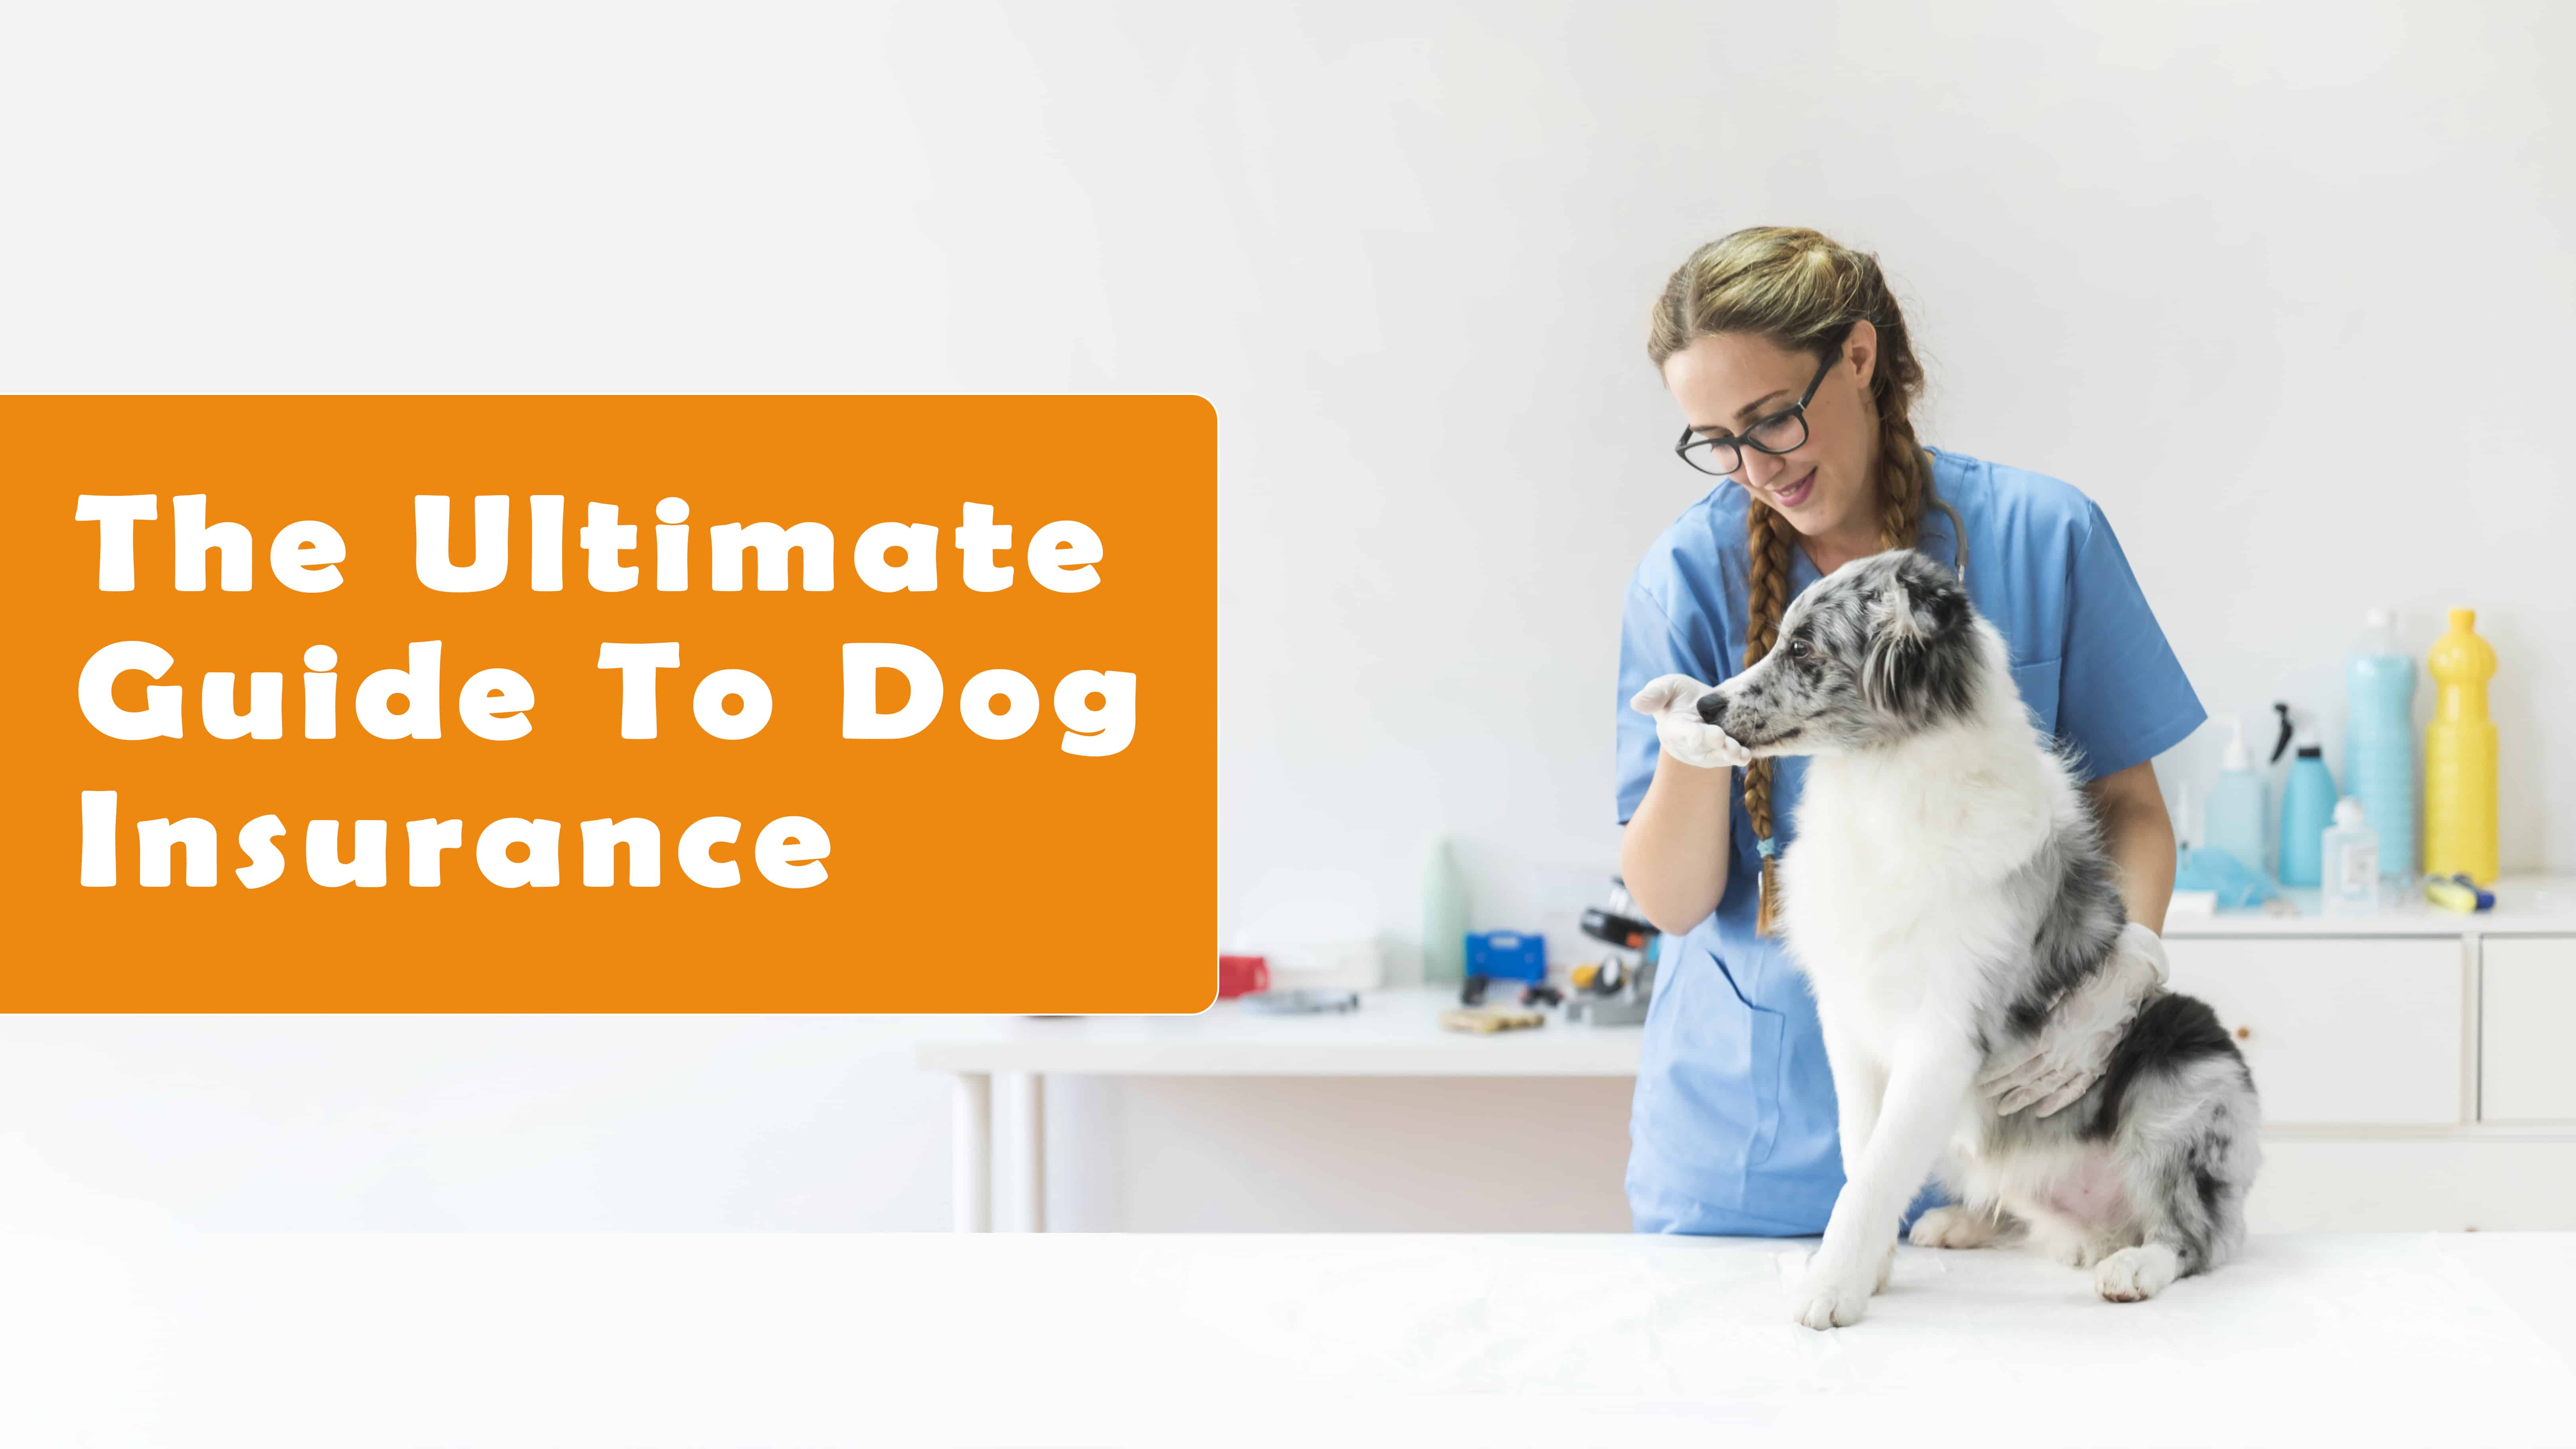 The Ultimate Guide to Dog Insurance With Top 20 Companies Ranked 